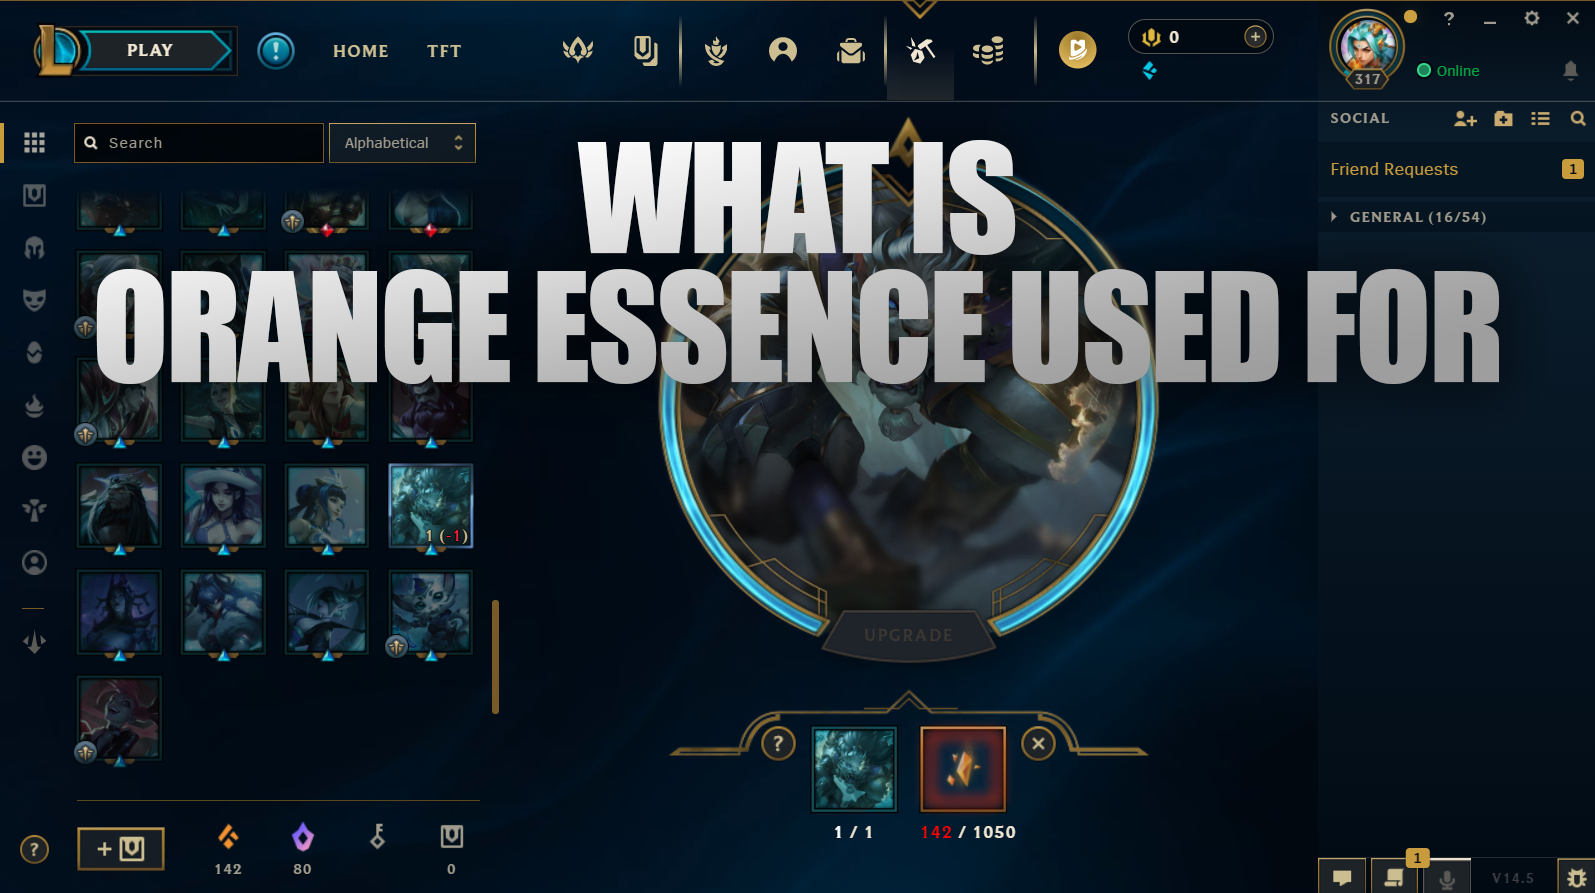 One of the primary uses of Orange Essence is to unlock skin shards and turn them into permanent skins for your champions. The amount of Orange Essence required varies based on the skin's rarity – Epic skins cost 1050 Orange Essence, while the Legendary skins cost 1520 Orange Essence.